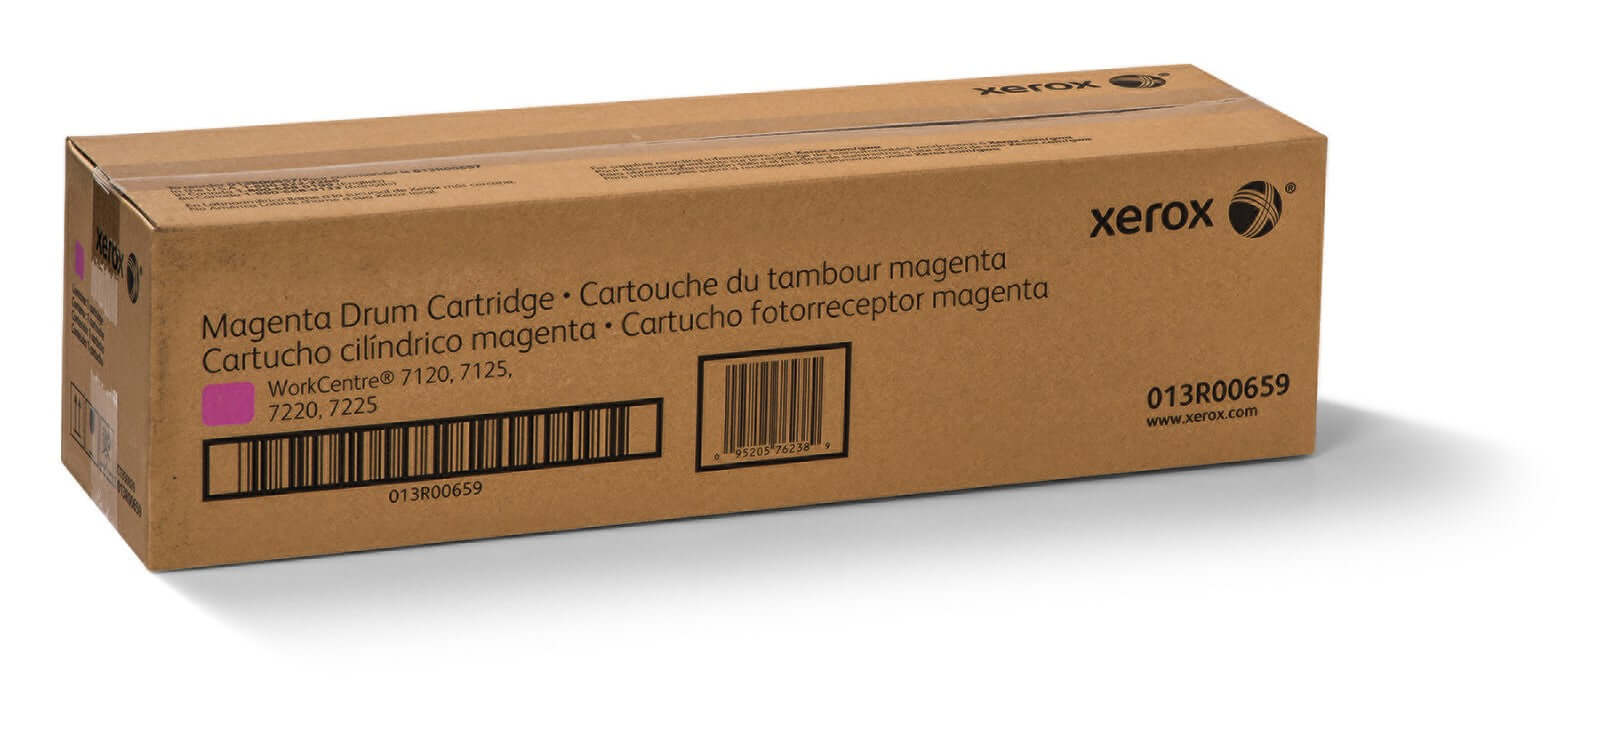 Xerox Magenta Drum Cartridge (51,000) 013R00659 for WorkCentre 7120/7125/7220/7225/7220i/7225i